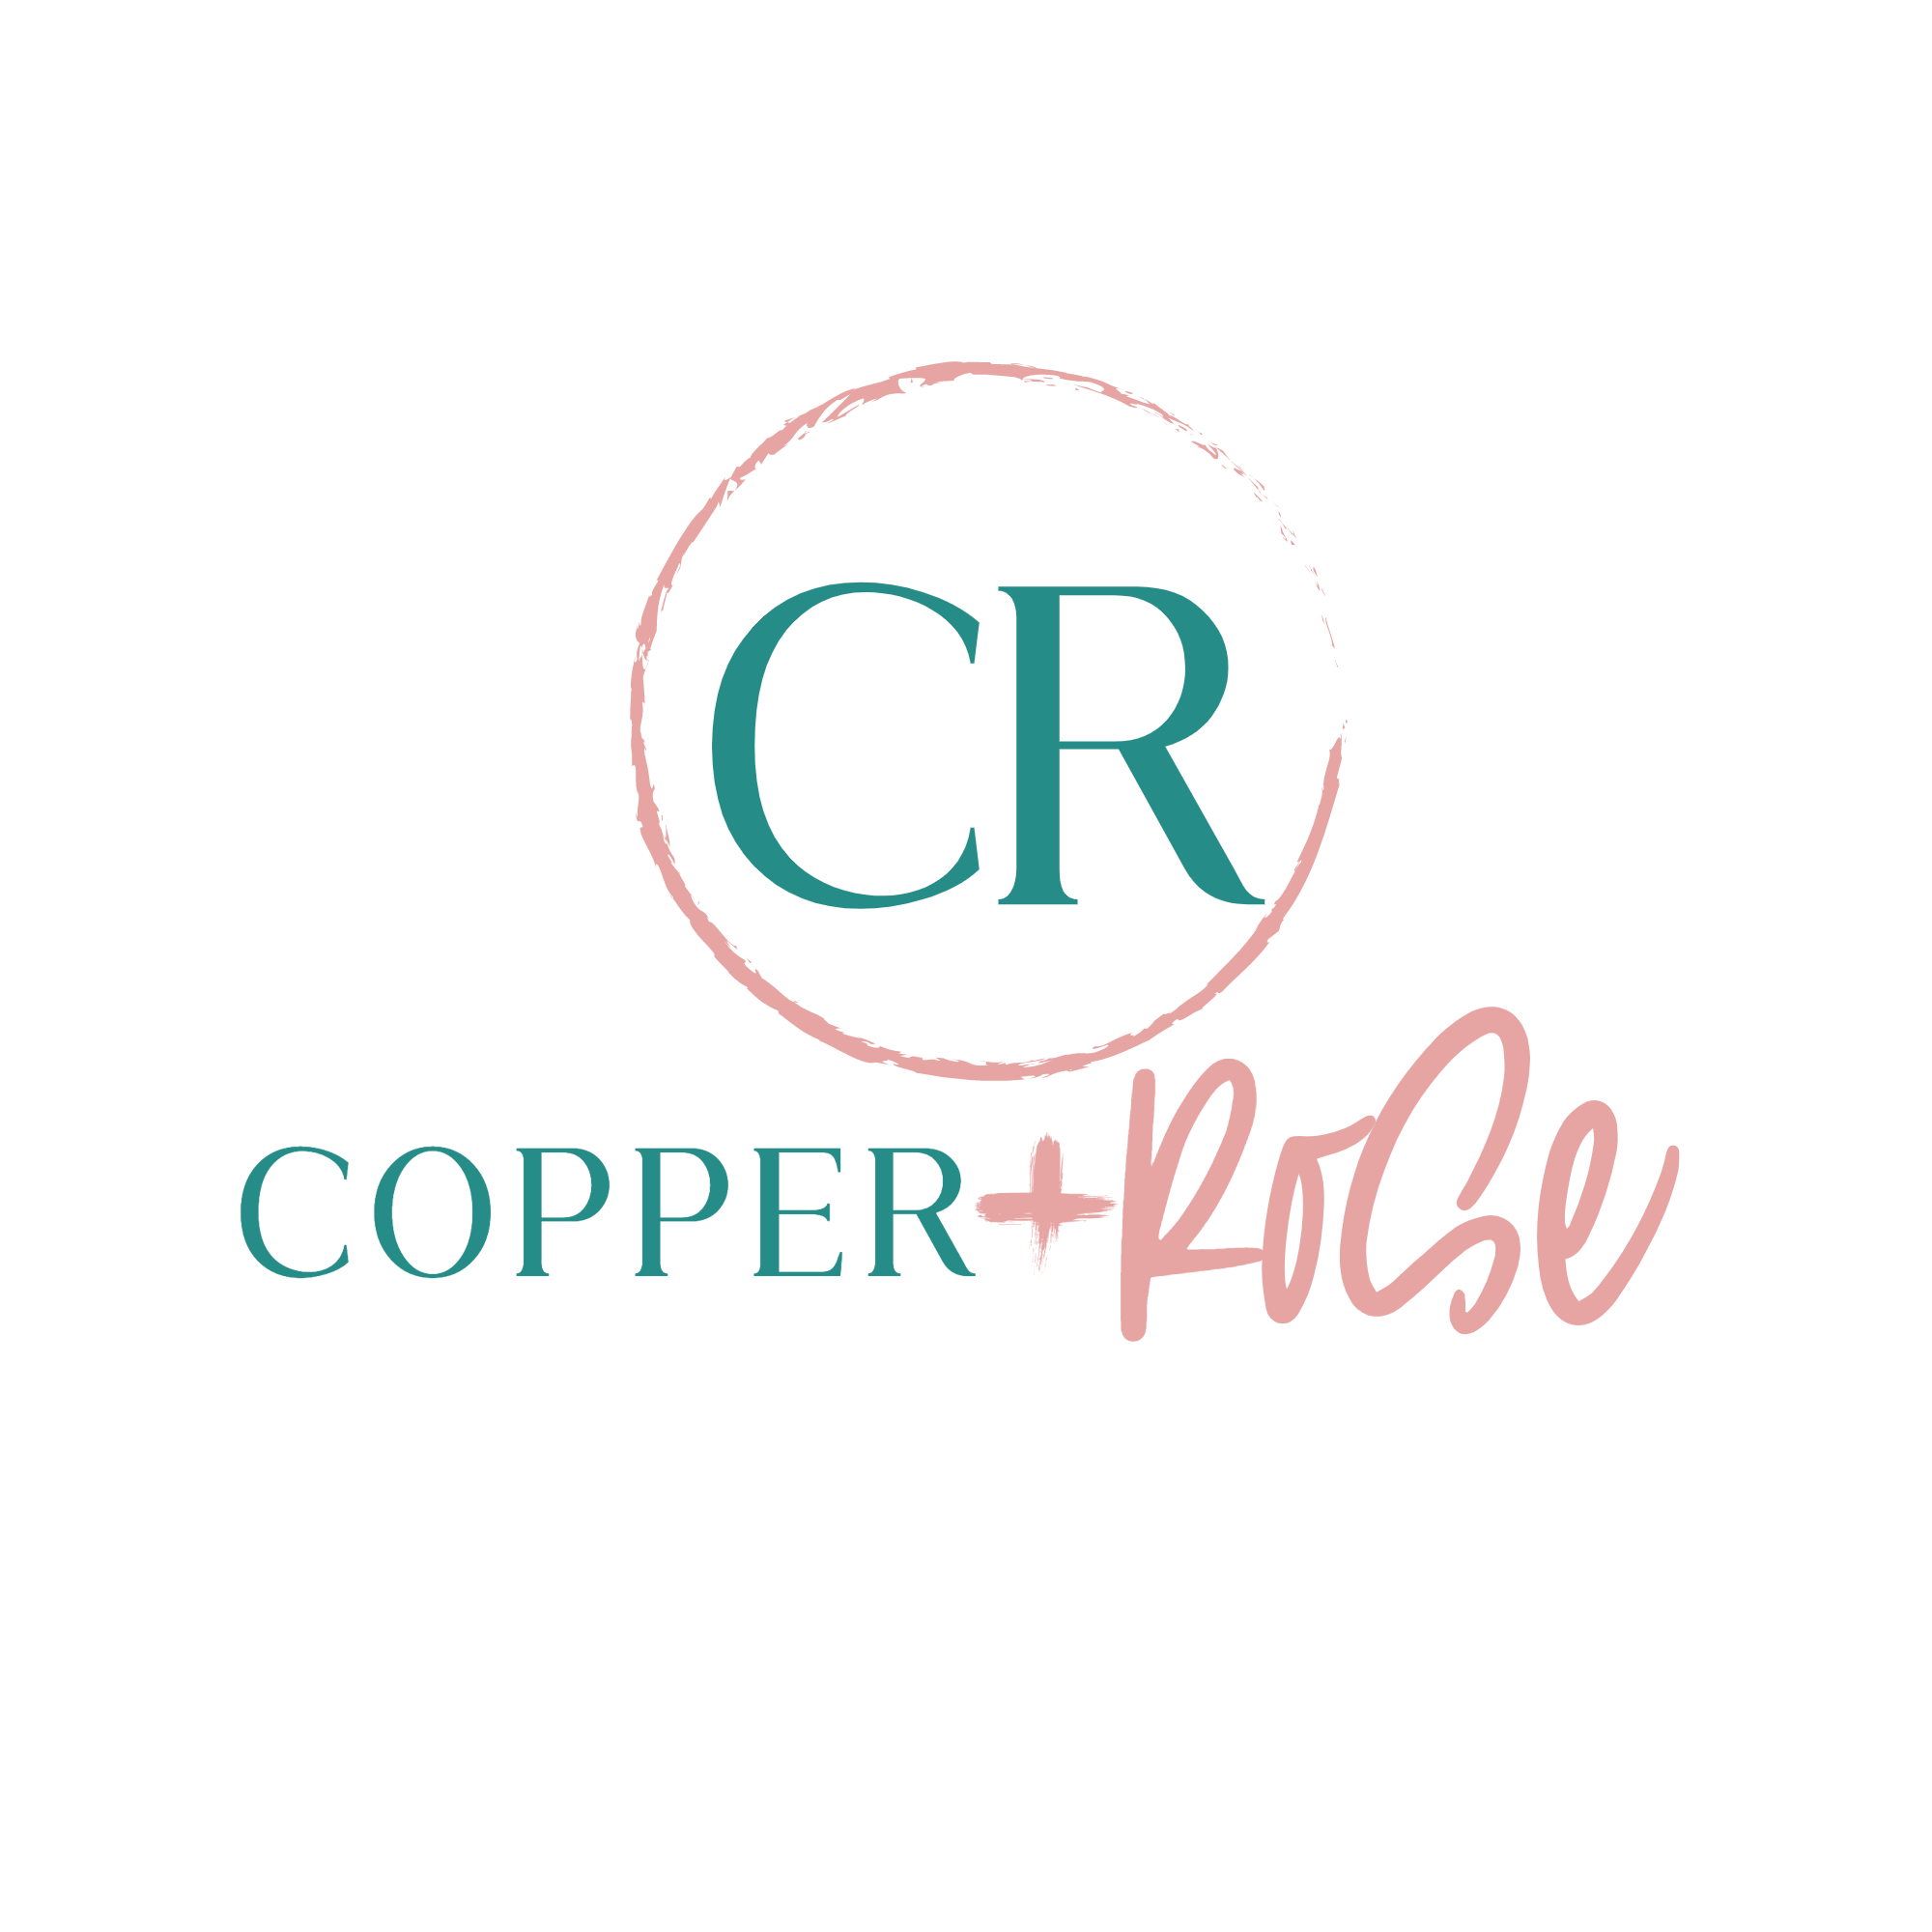 New Rose Copper – + Releases